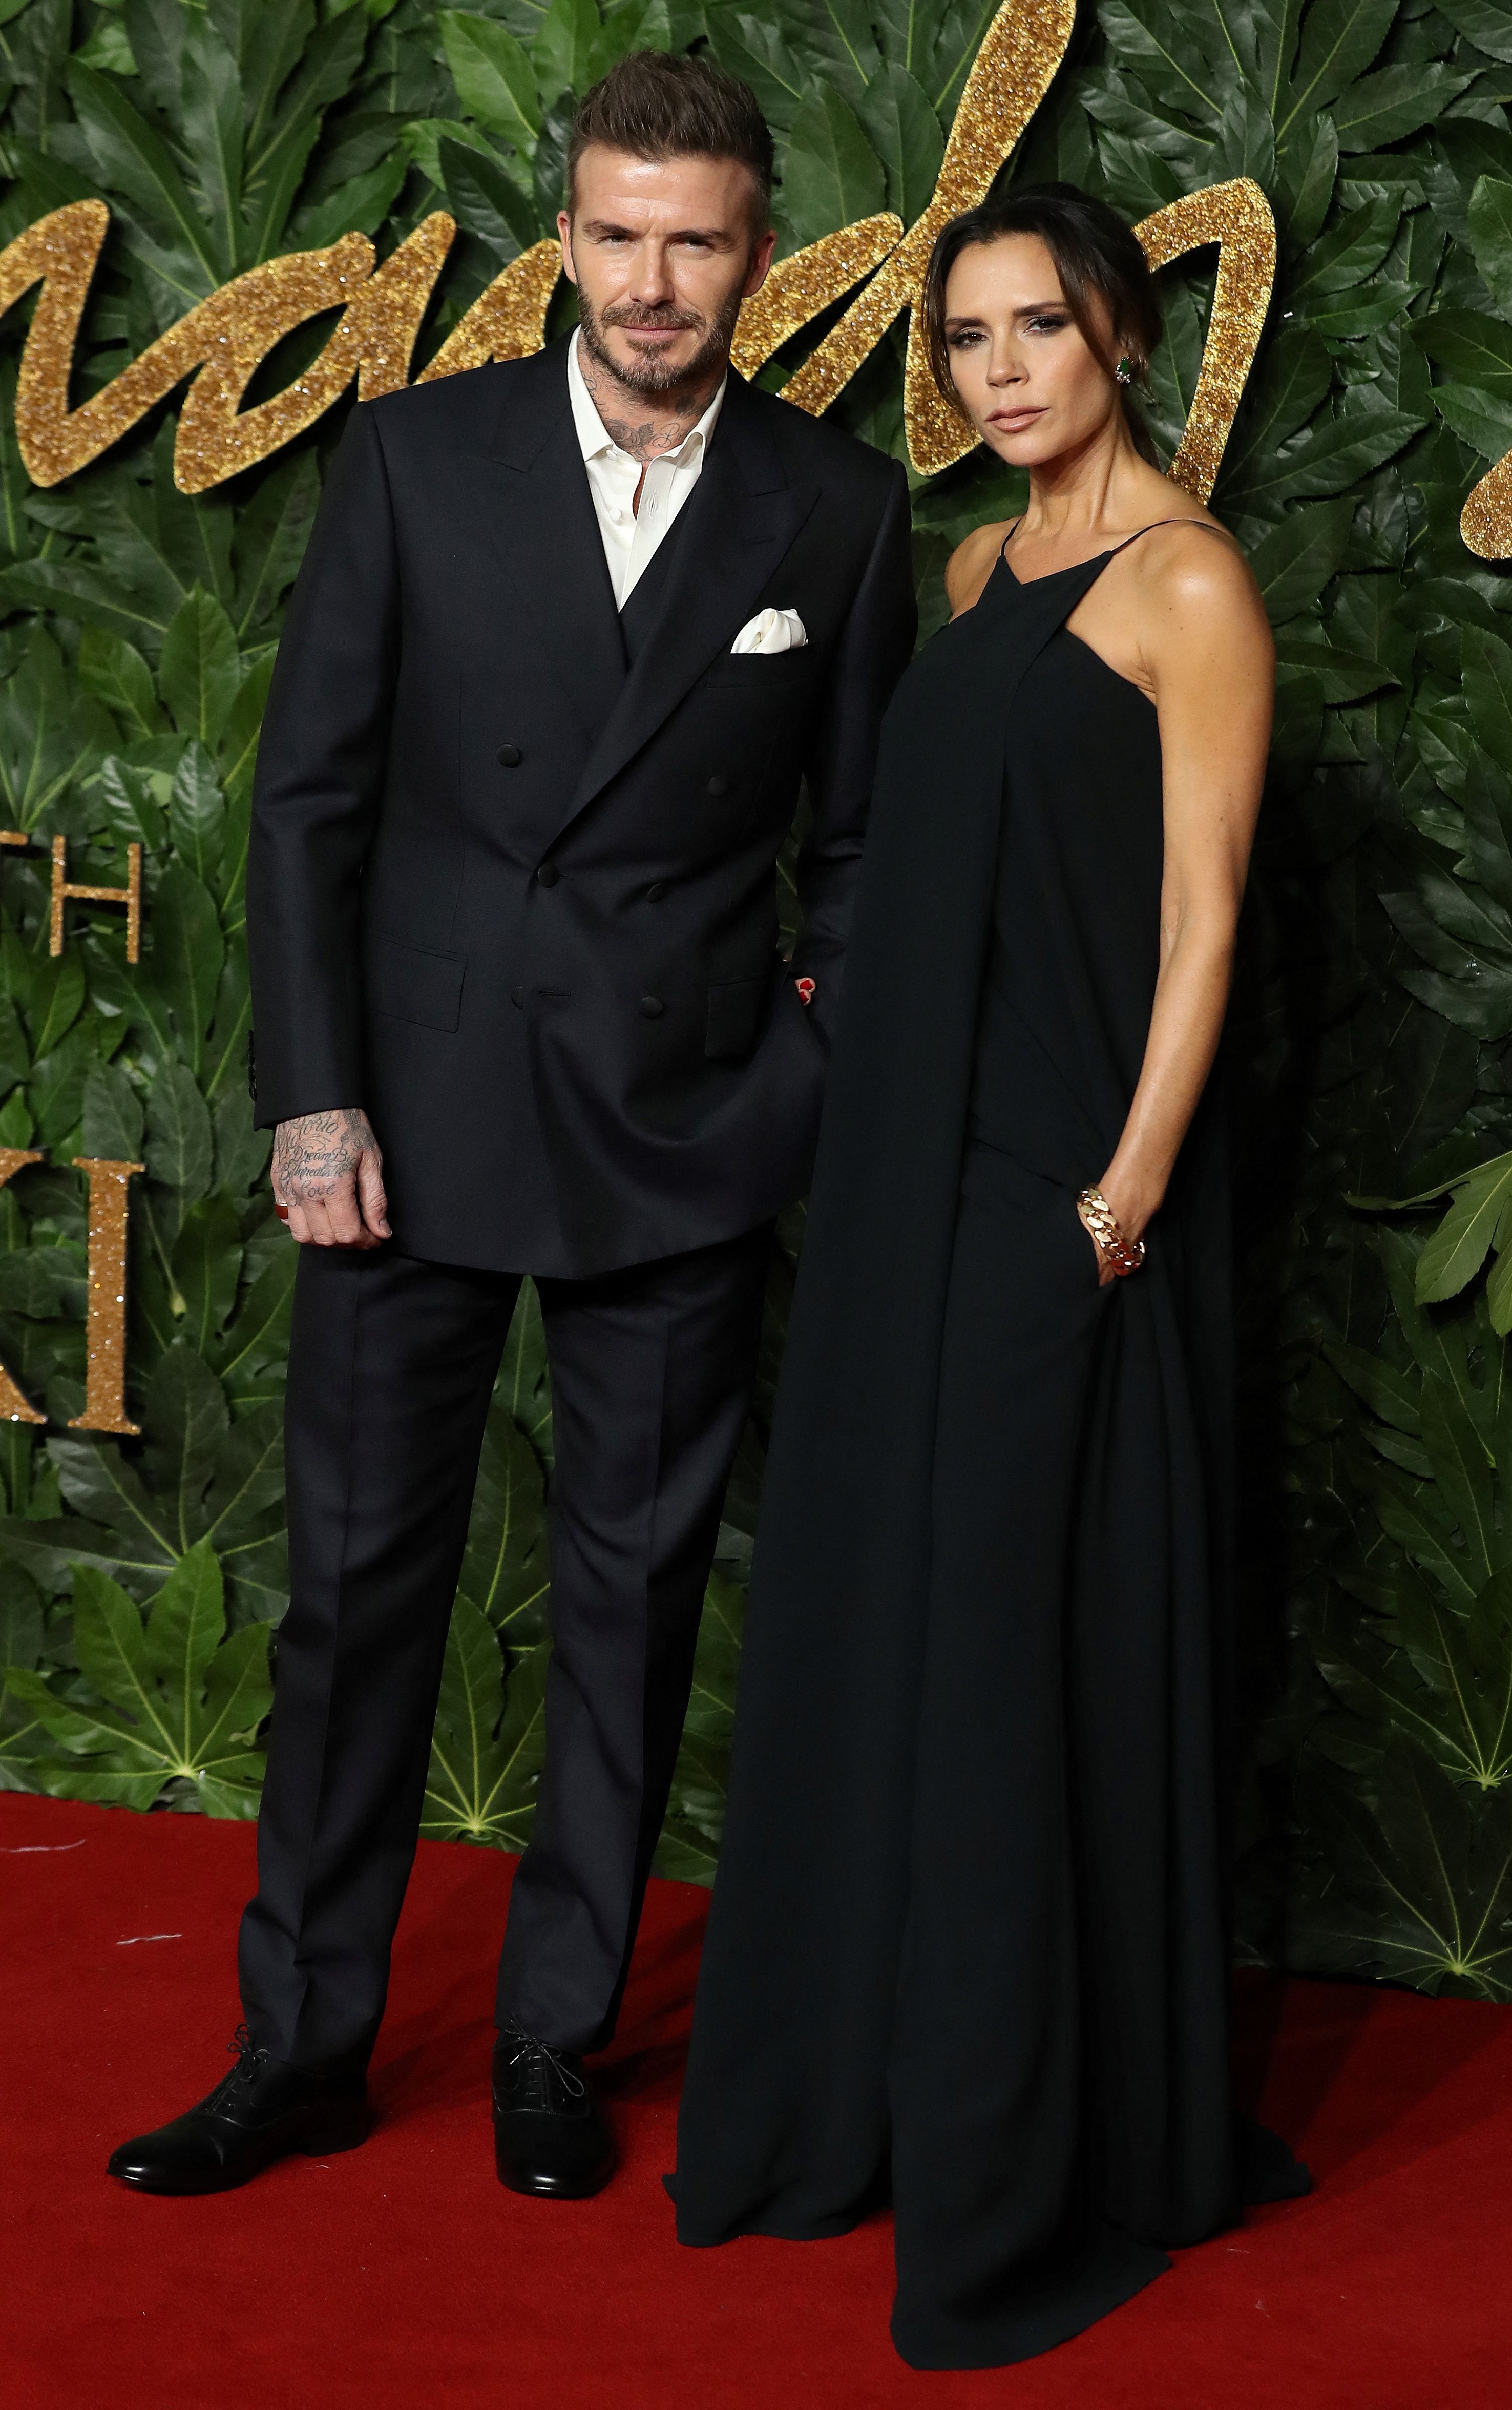 David and Victoria Beckham at the British Fashion Awards in London on December 10, 2018. | Source: Getty Images